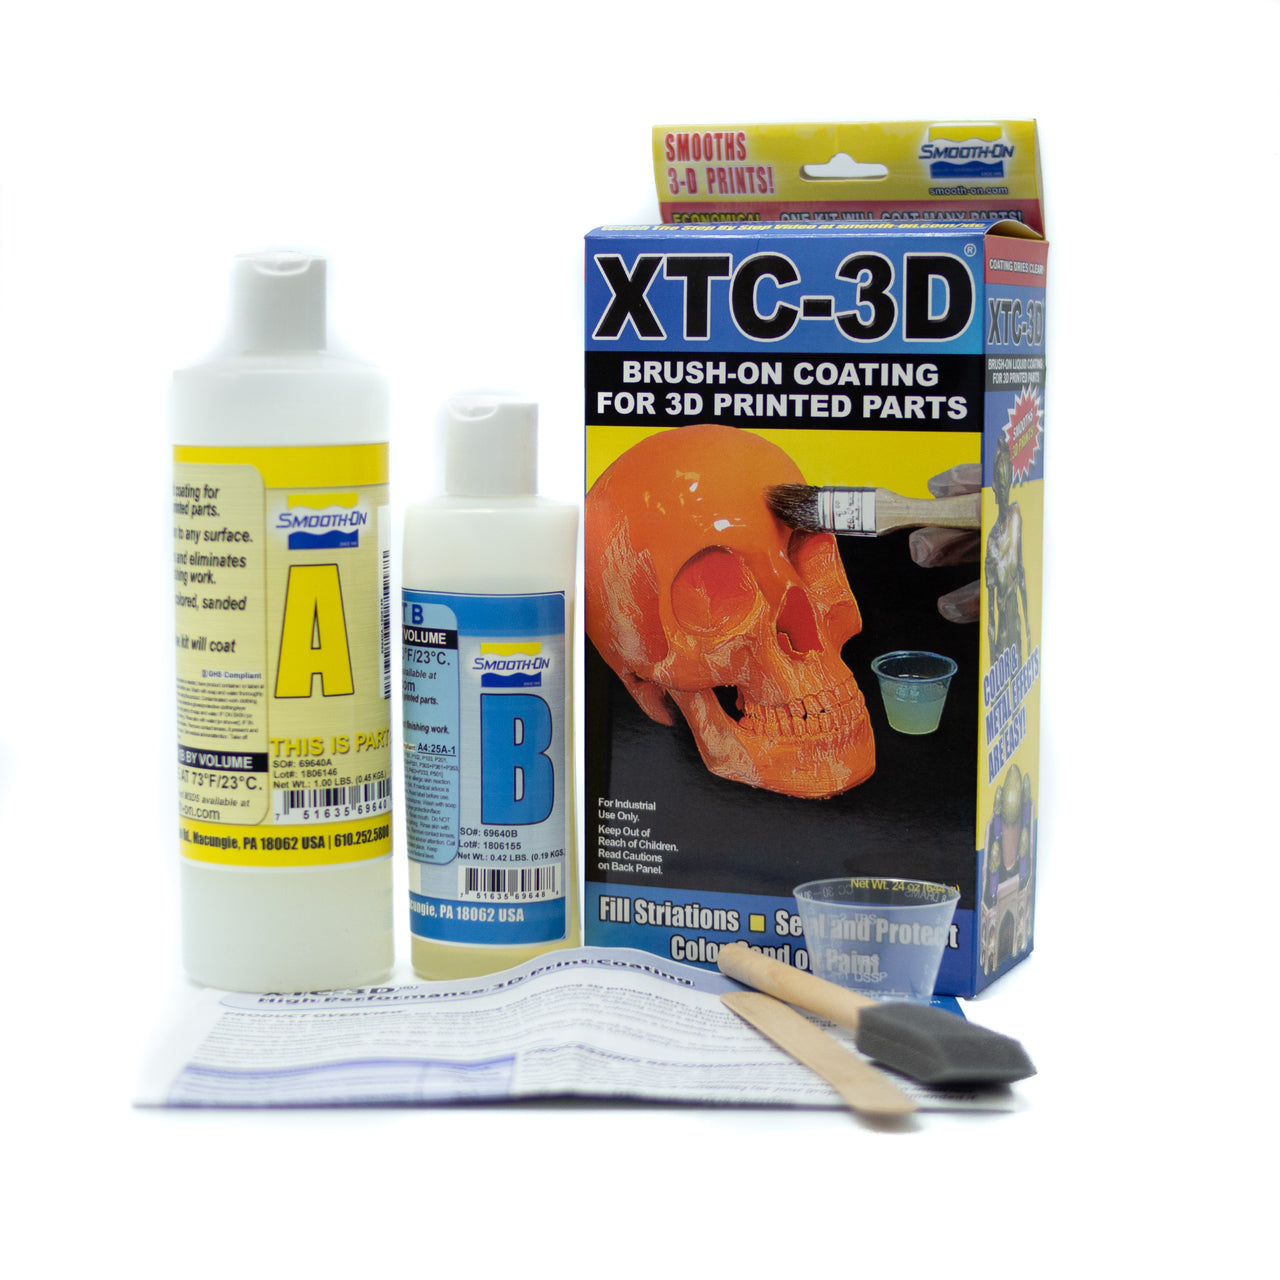 XTC 3D - Brush on coating for 3D printed parts - 644gm, Clear epoxy Resin- Lumin's Workshop